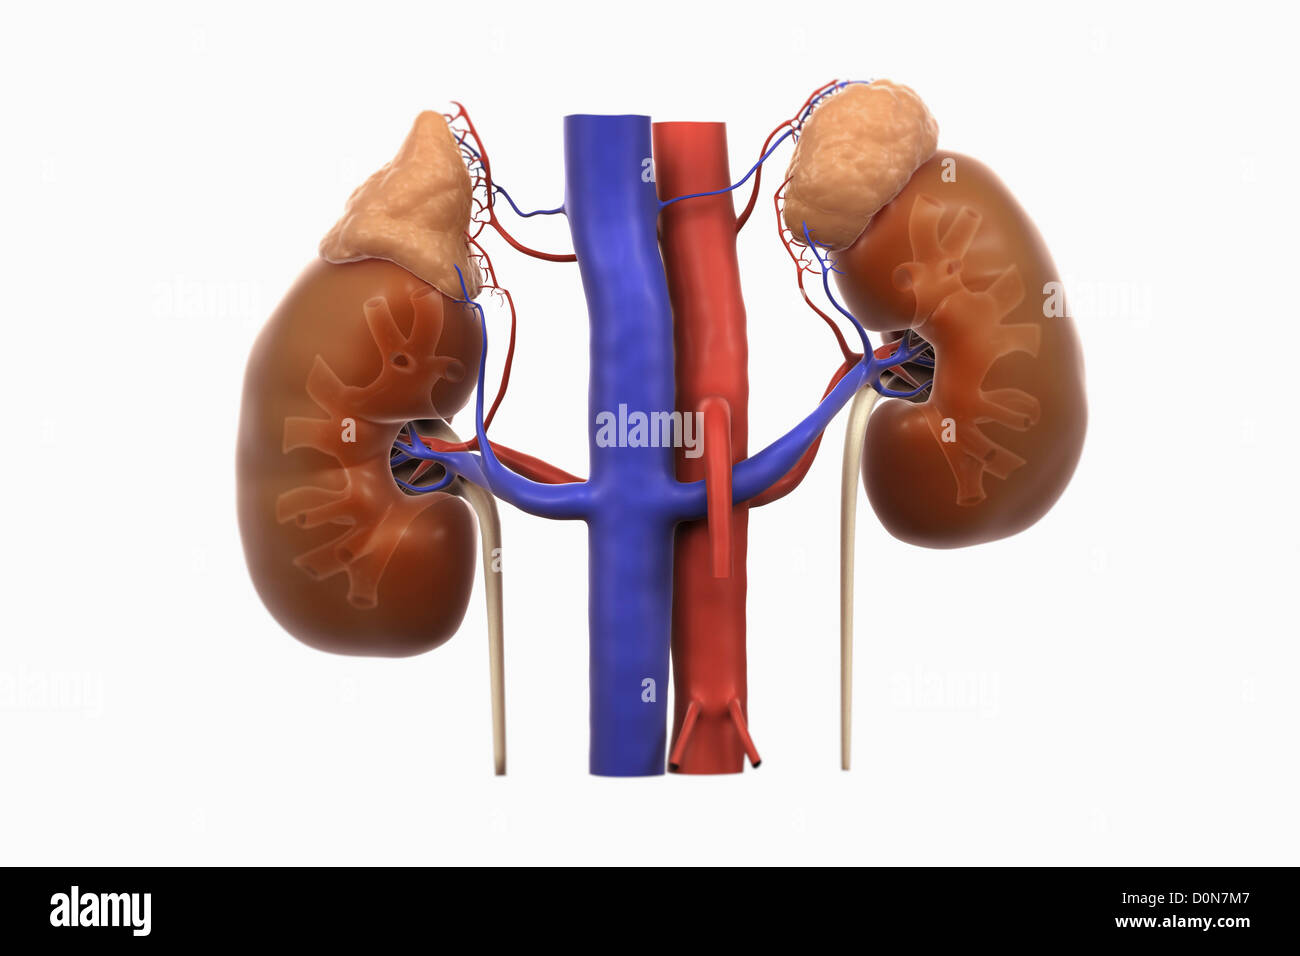 Human kidneys blood supply. right left kidneys are transparent reveal inner calyx structures. adrenal glands are also present Stock Photo